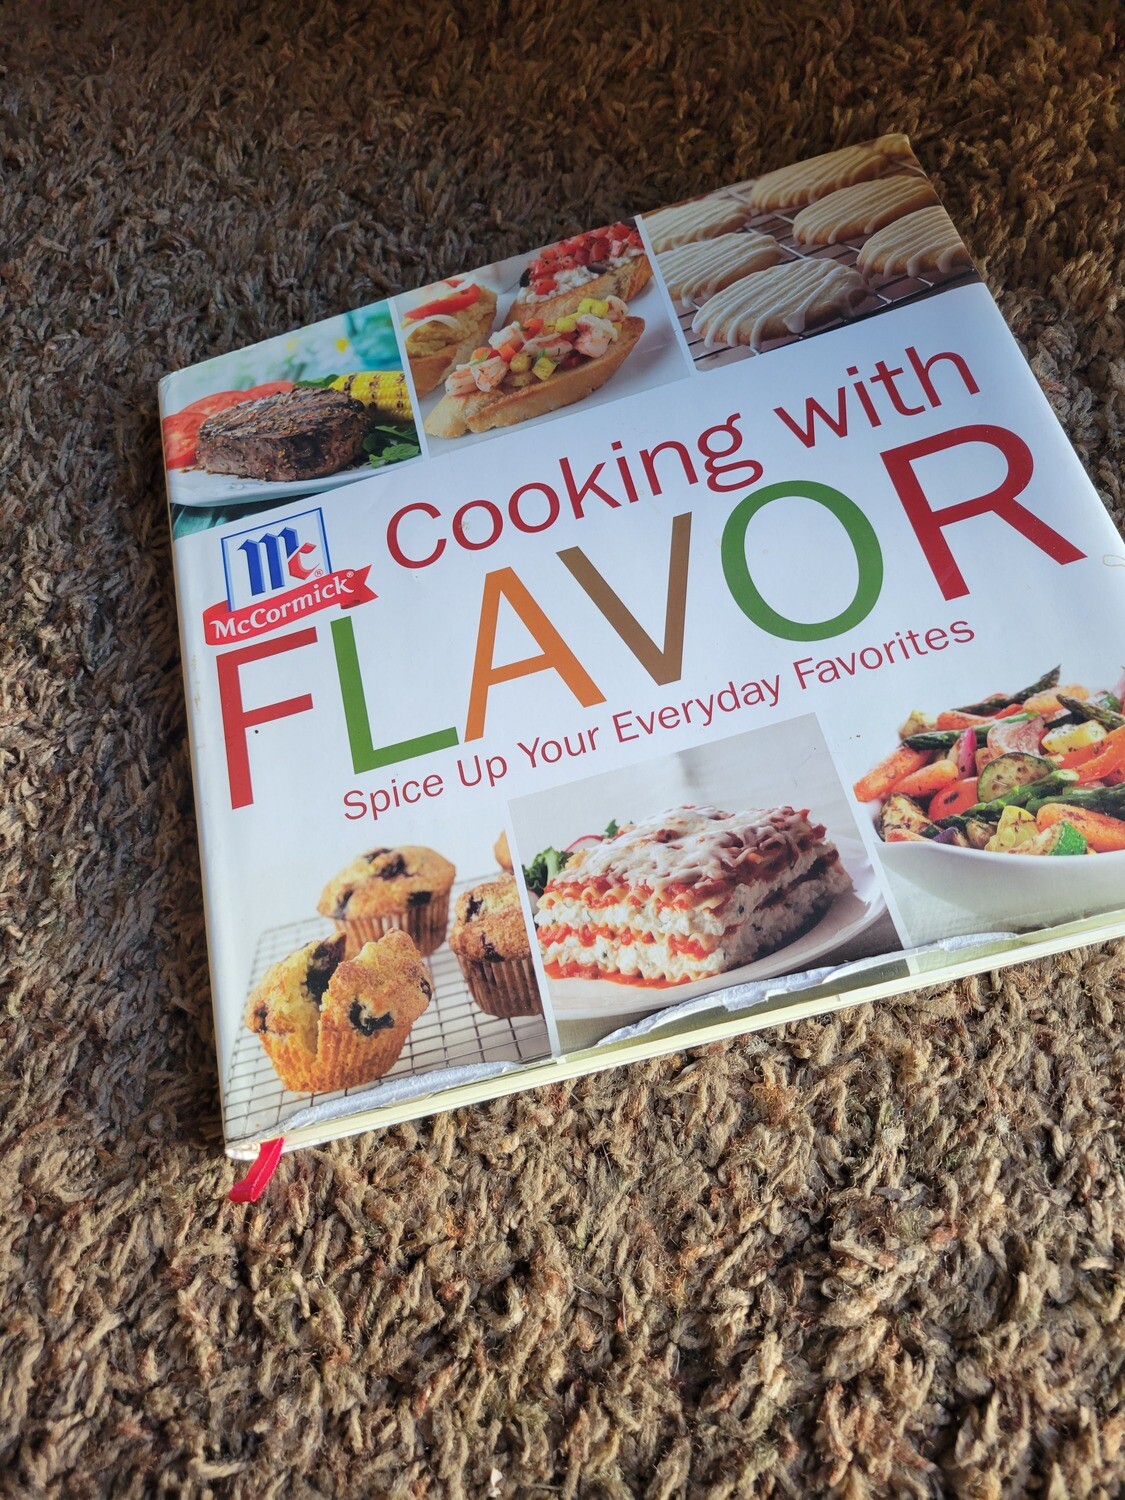 Cooking with flavor